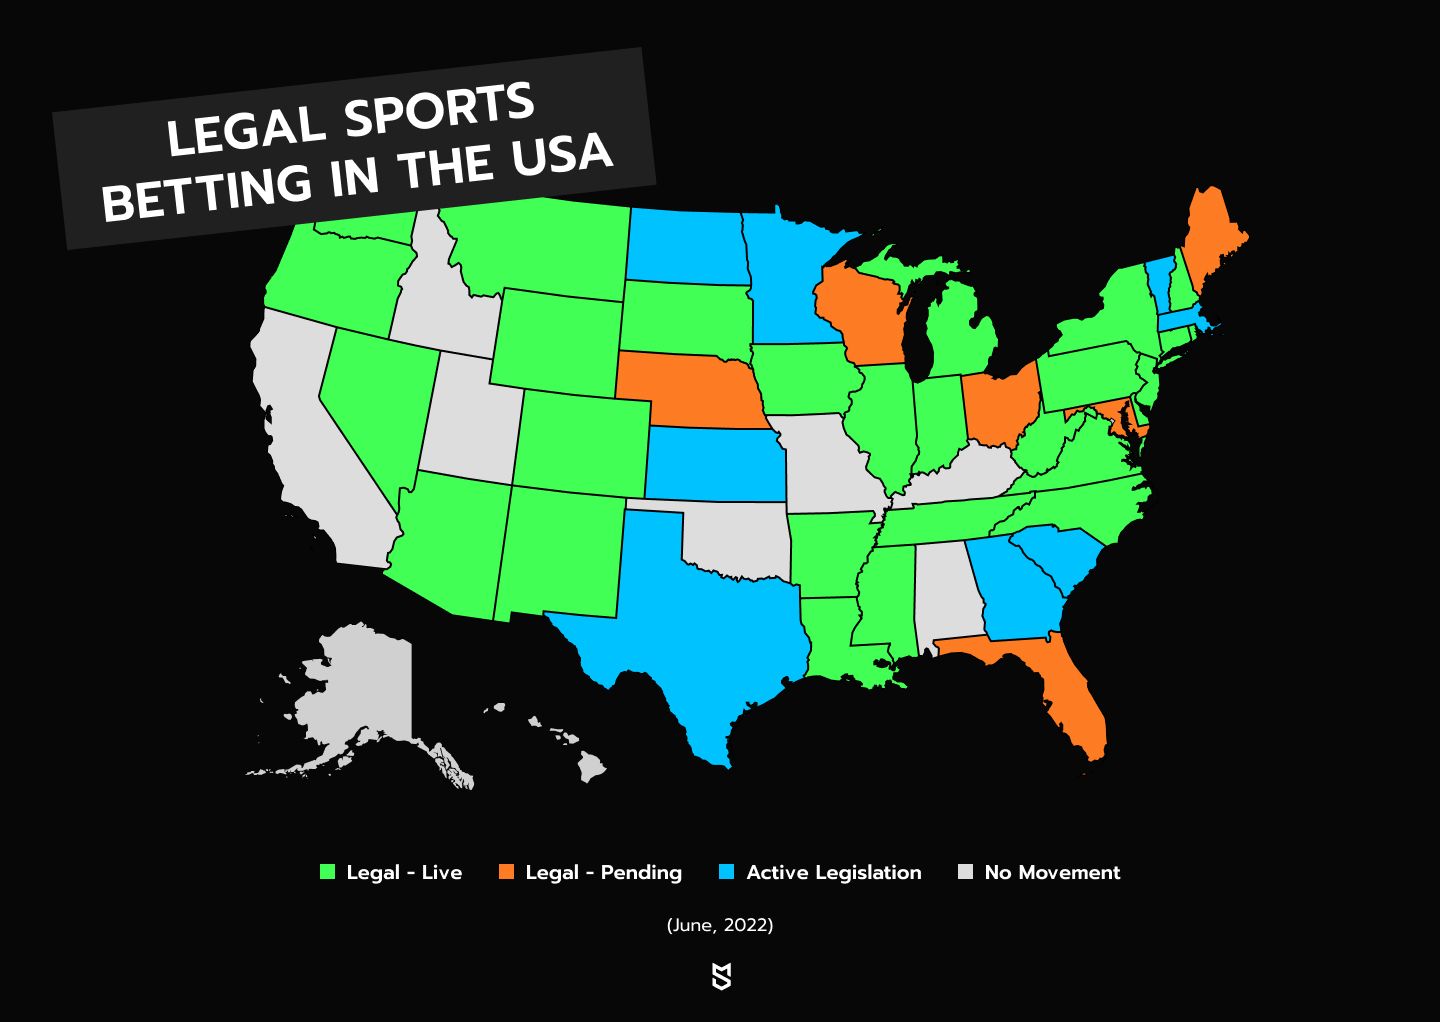 Legal sports betting in the USA